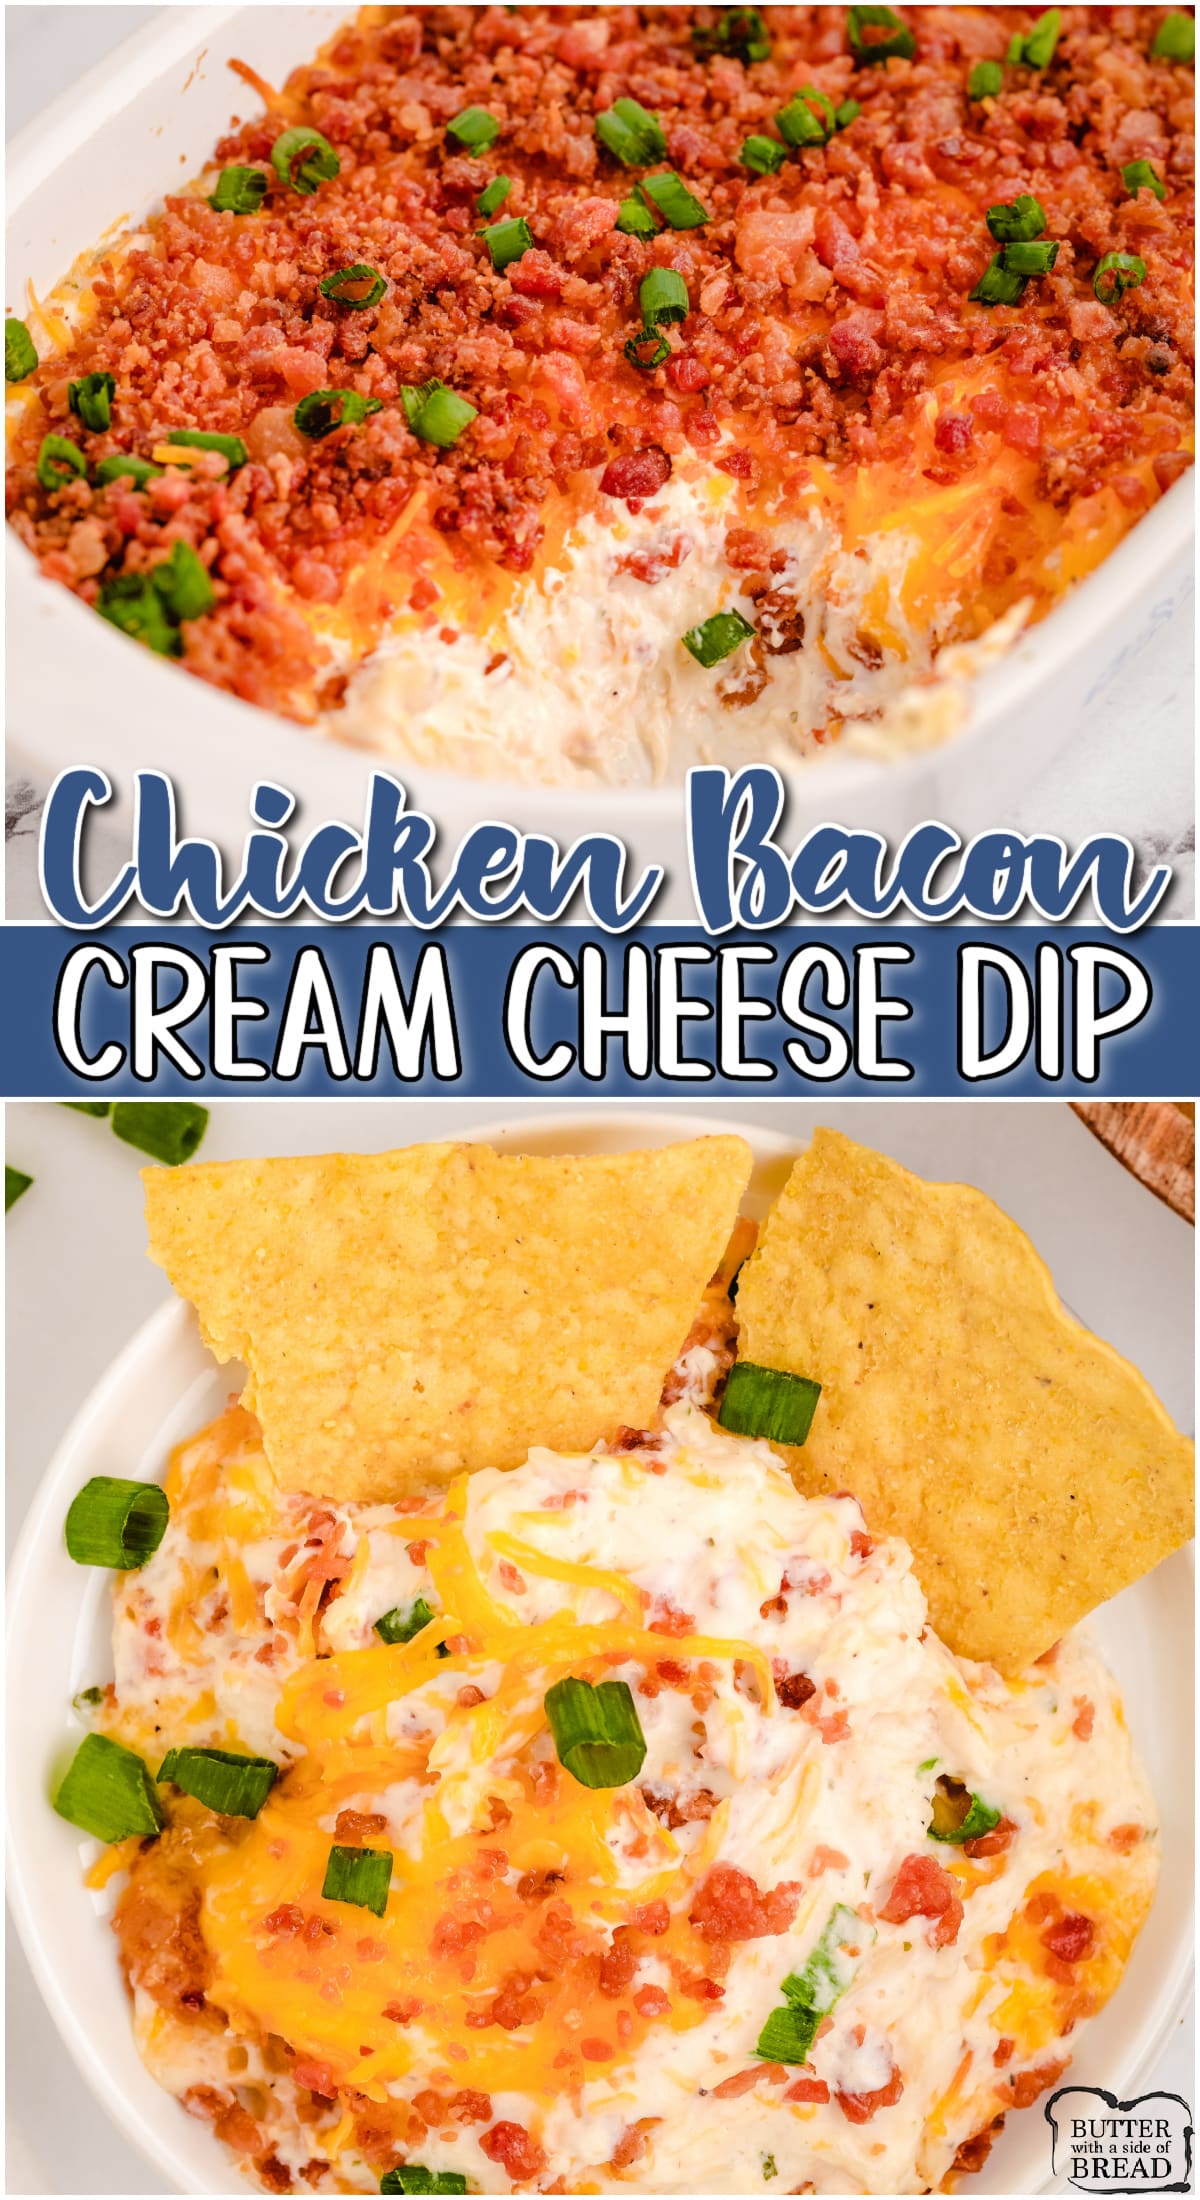 Chicken Cream Cheese Dip is a flavorful, easy recipe made with only 6 ingredients! Bacon cheddar ranch dip  is creamy, cheesy & filled with chicken and bacon for a fantastic dip!